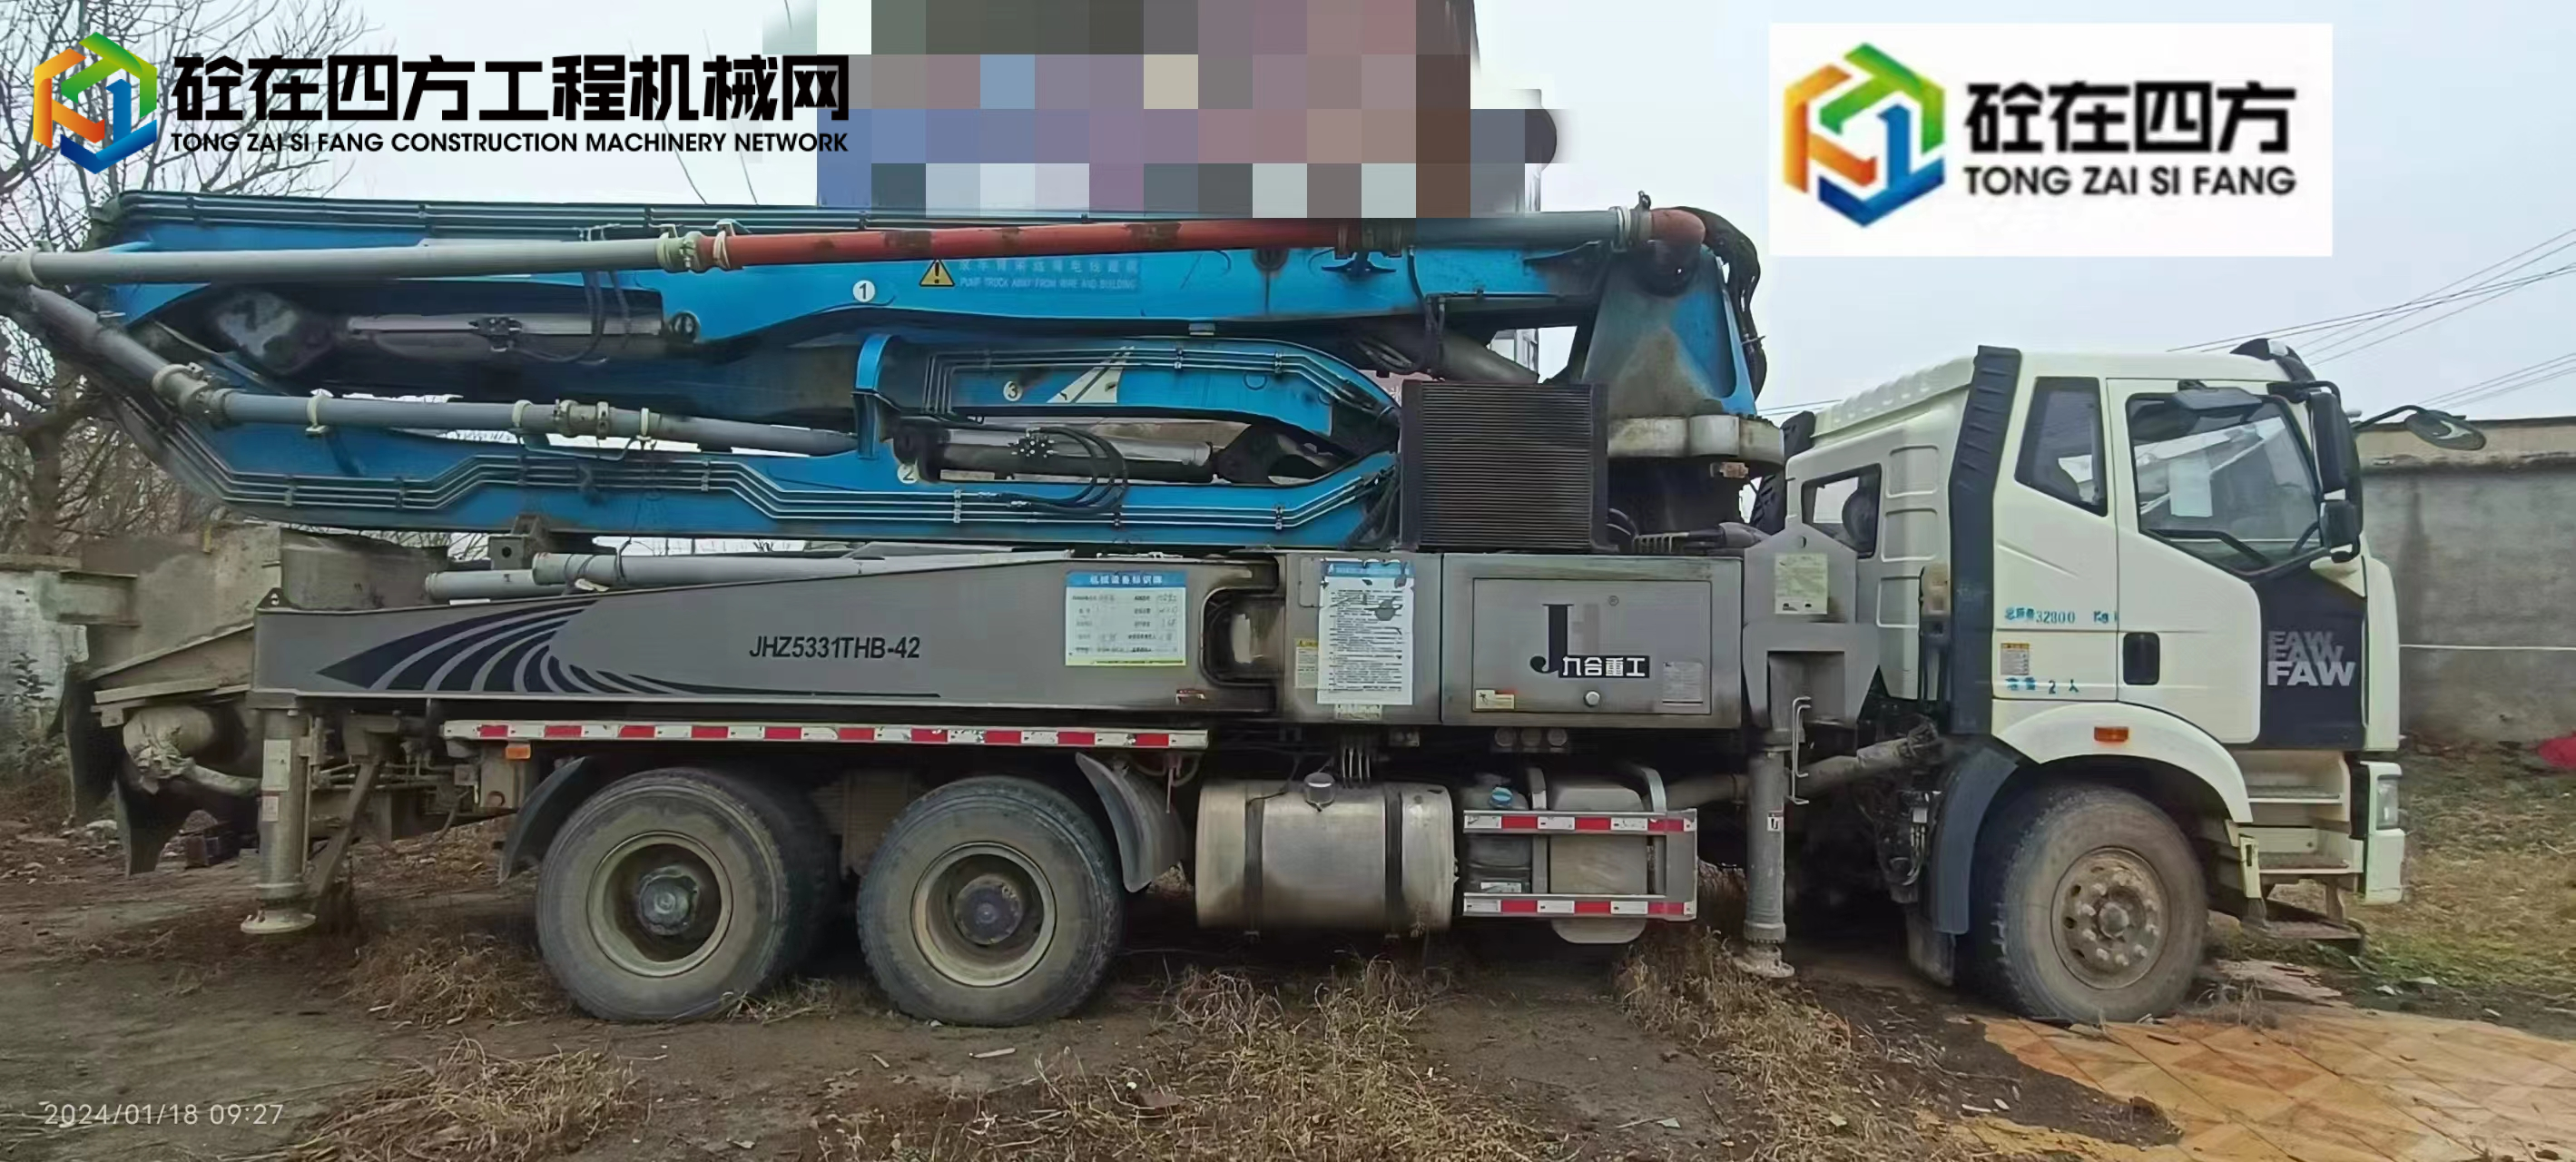 https://images.tongzsf.com/tong/truck_machine/20240118/165a8caf6a8616.jpg